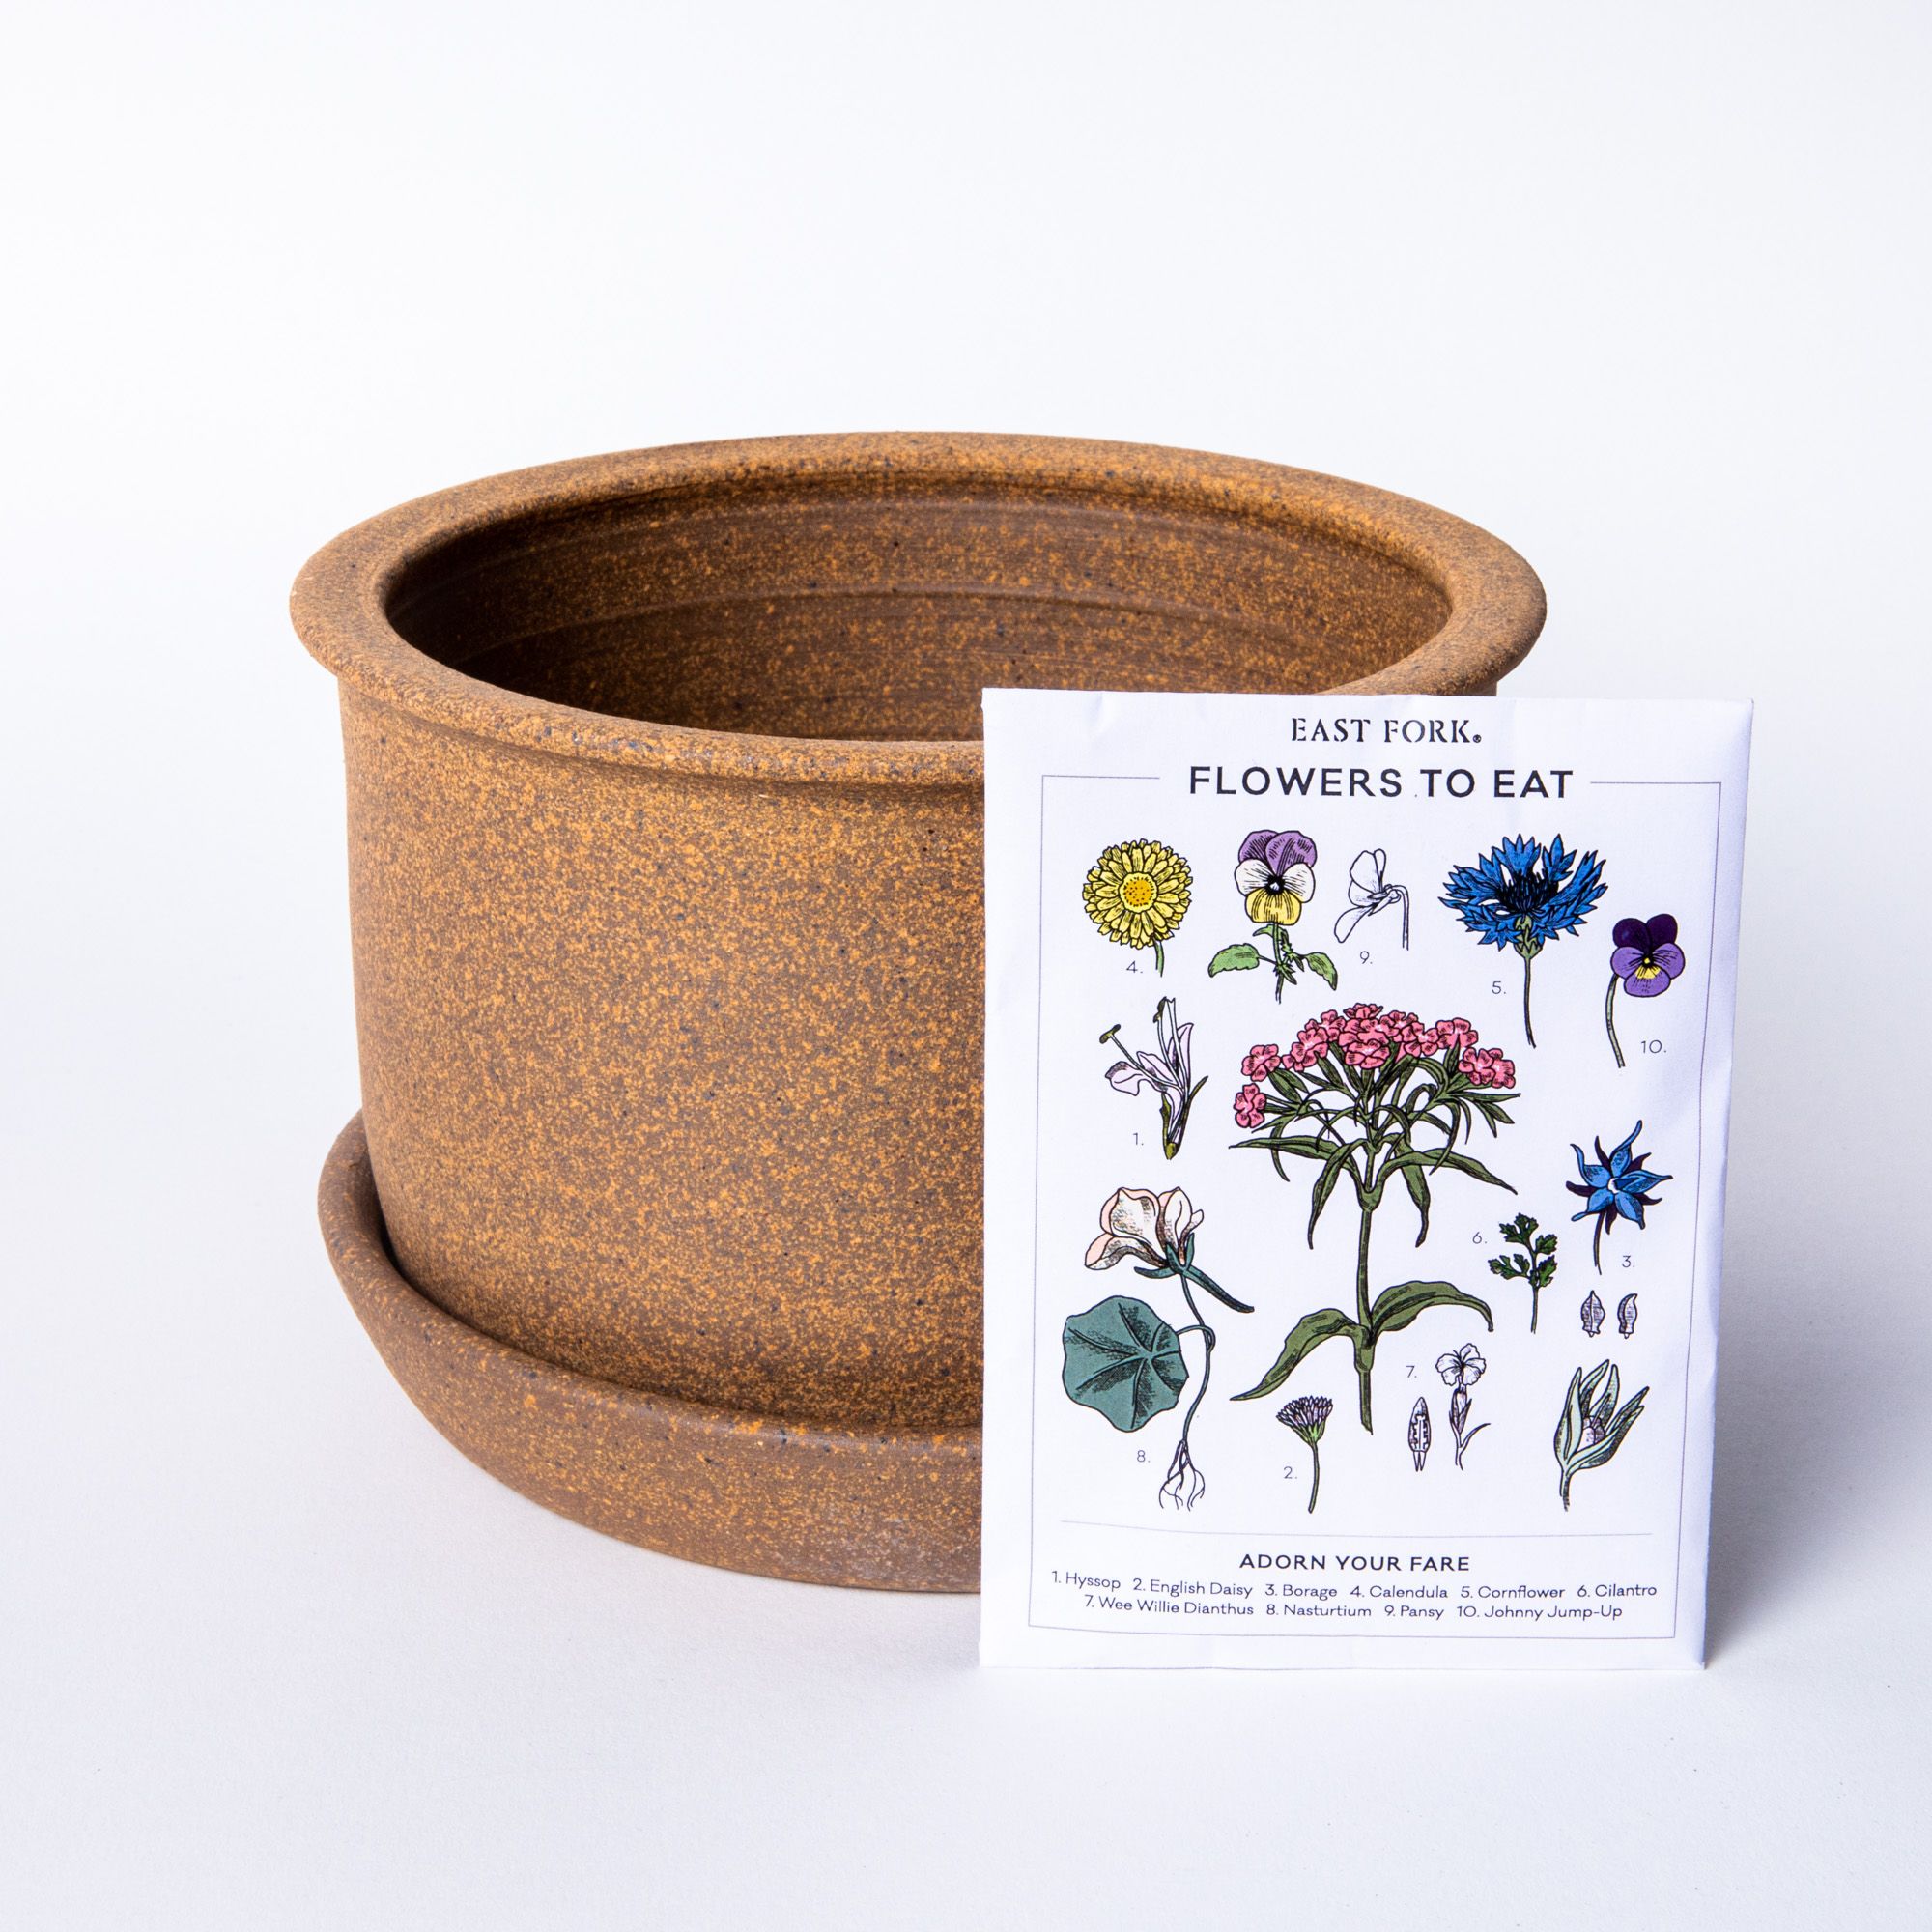 A warm earthy brown ceramic East Fork Workshop planter with a white rectangular bag of flower seeds with floral illustrations on the packaging